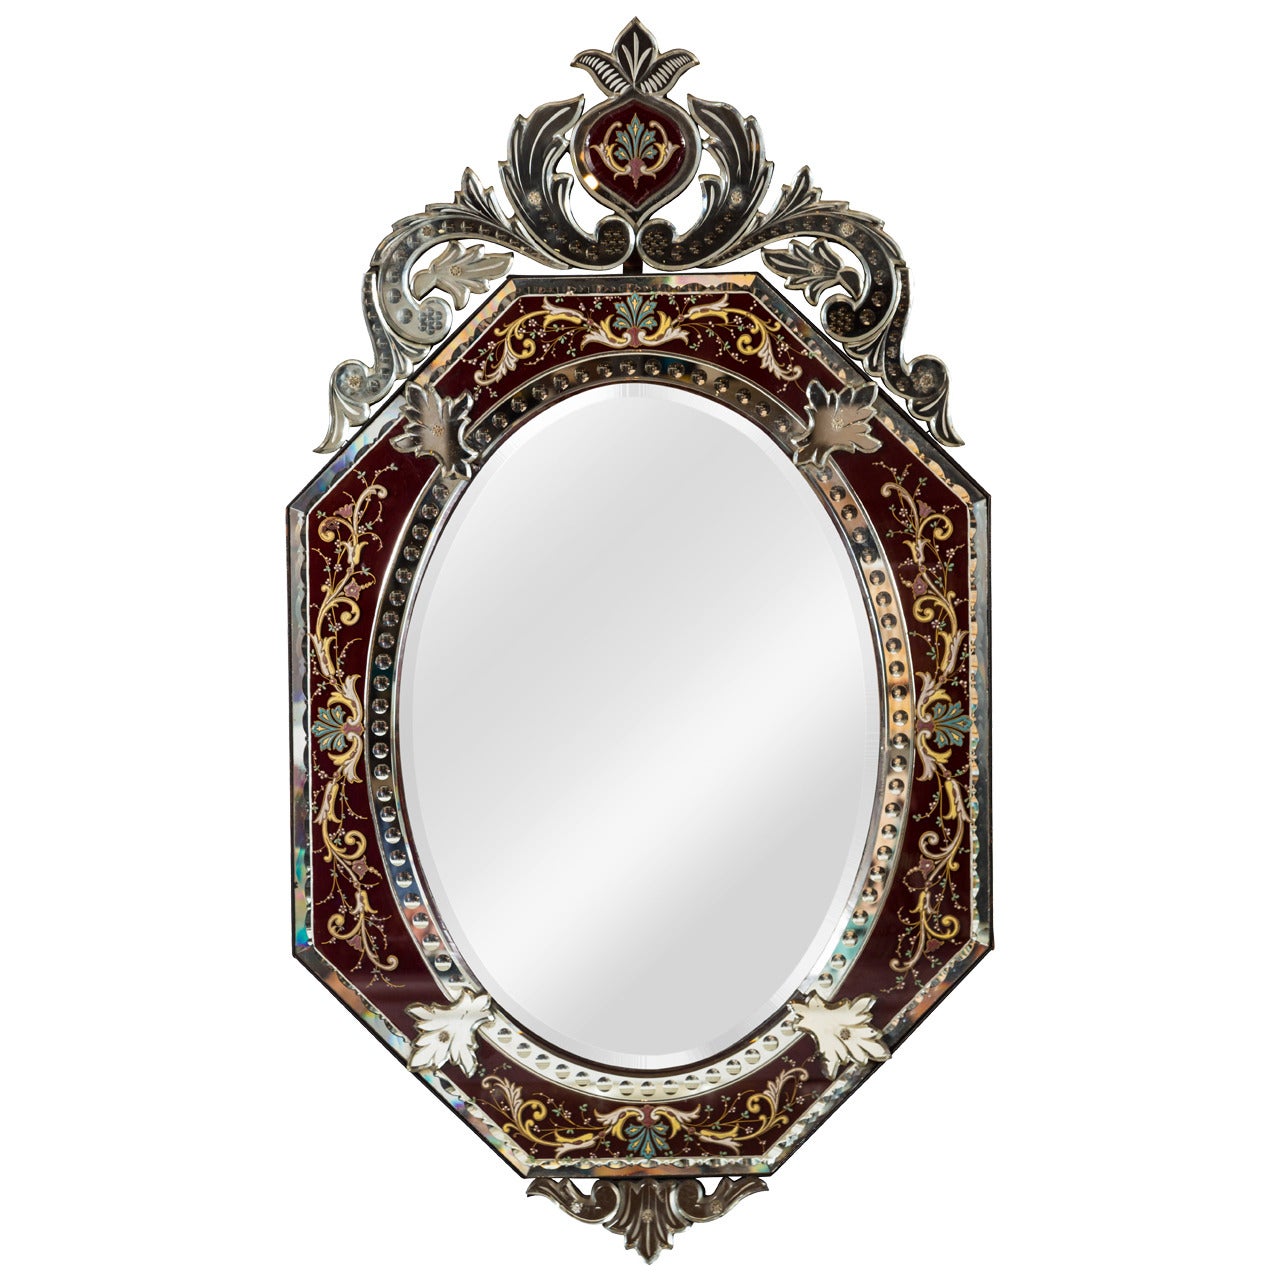 Exquisite and Unique Venetian Mirror with Enameled Decoration